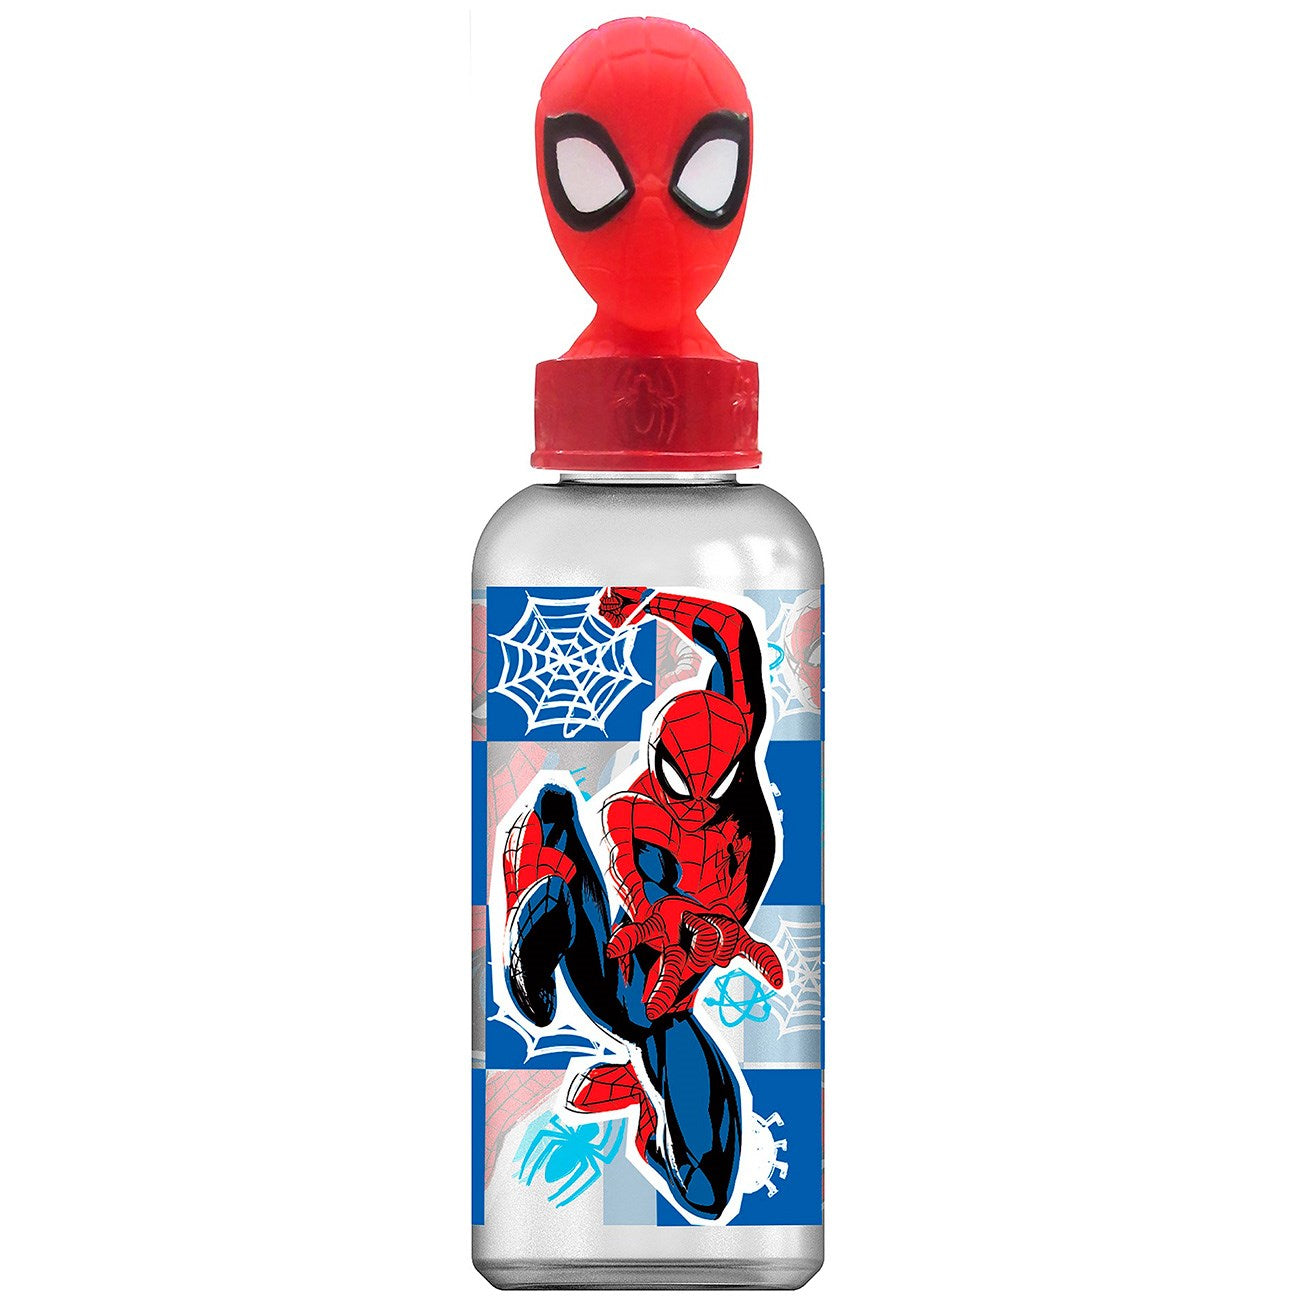 Euromic Spiderman Water Bottle with 3D Figure